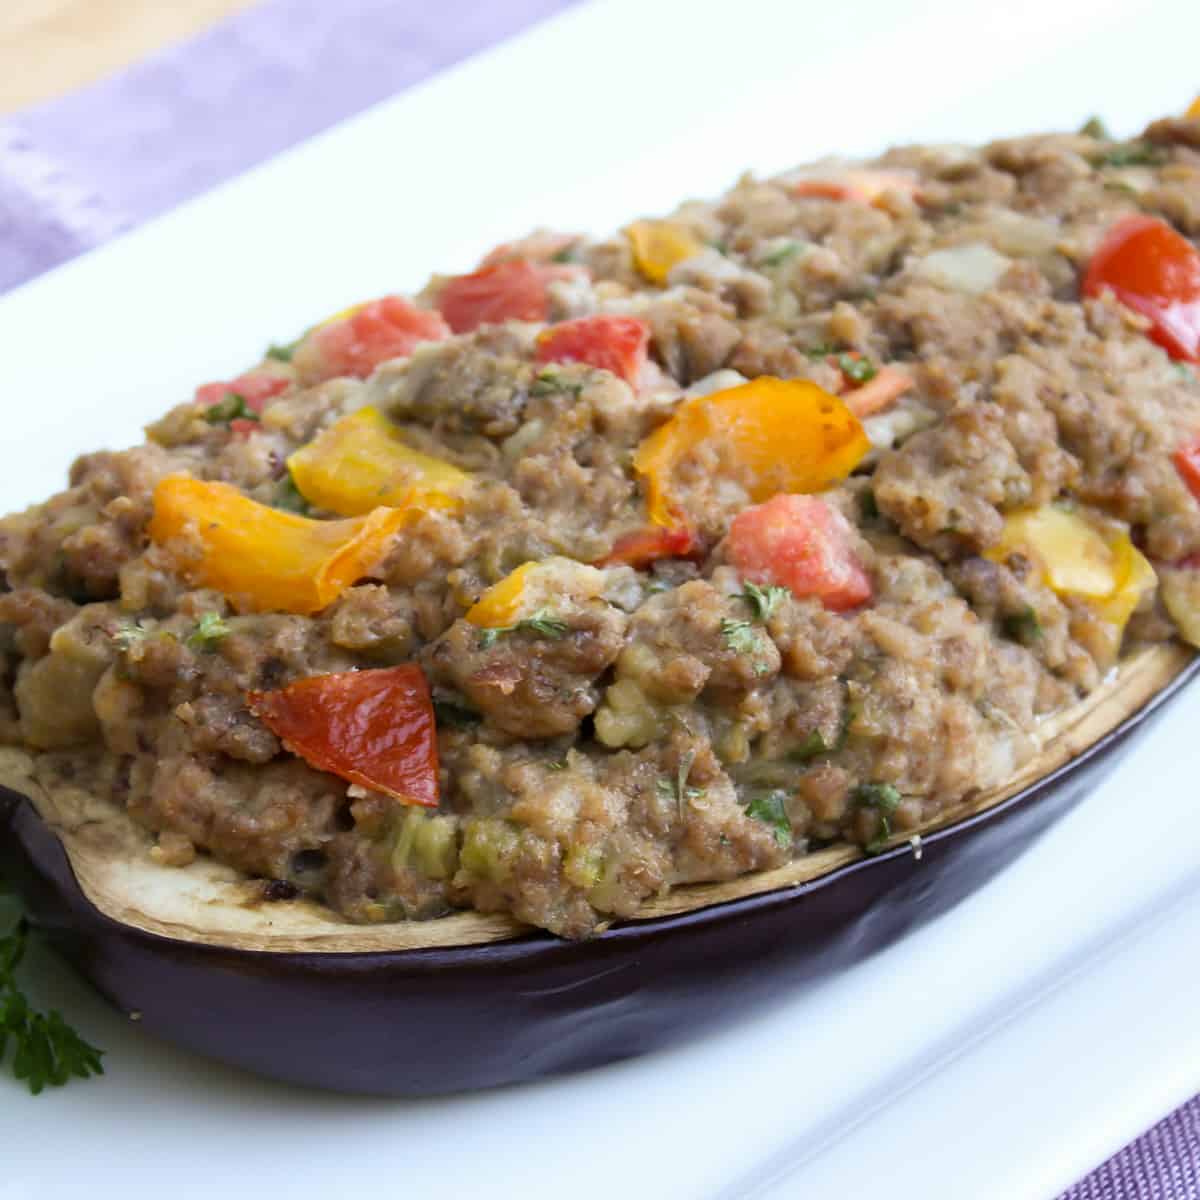 Close up picture of eggplant with a filling of meat and peppers.